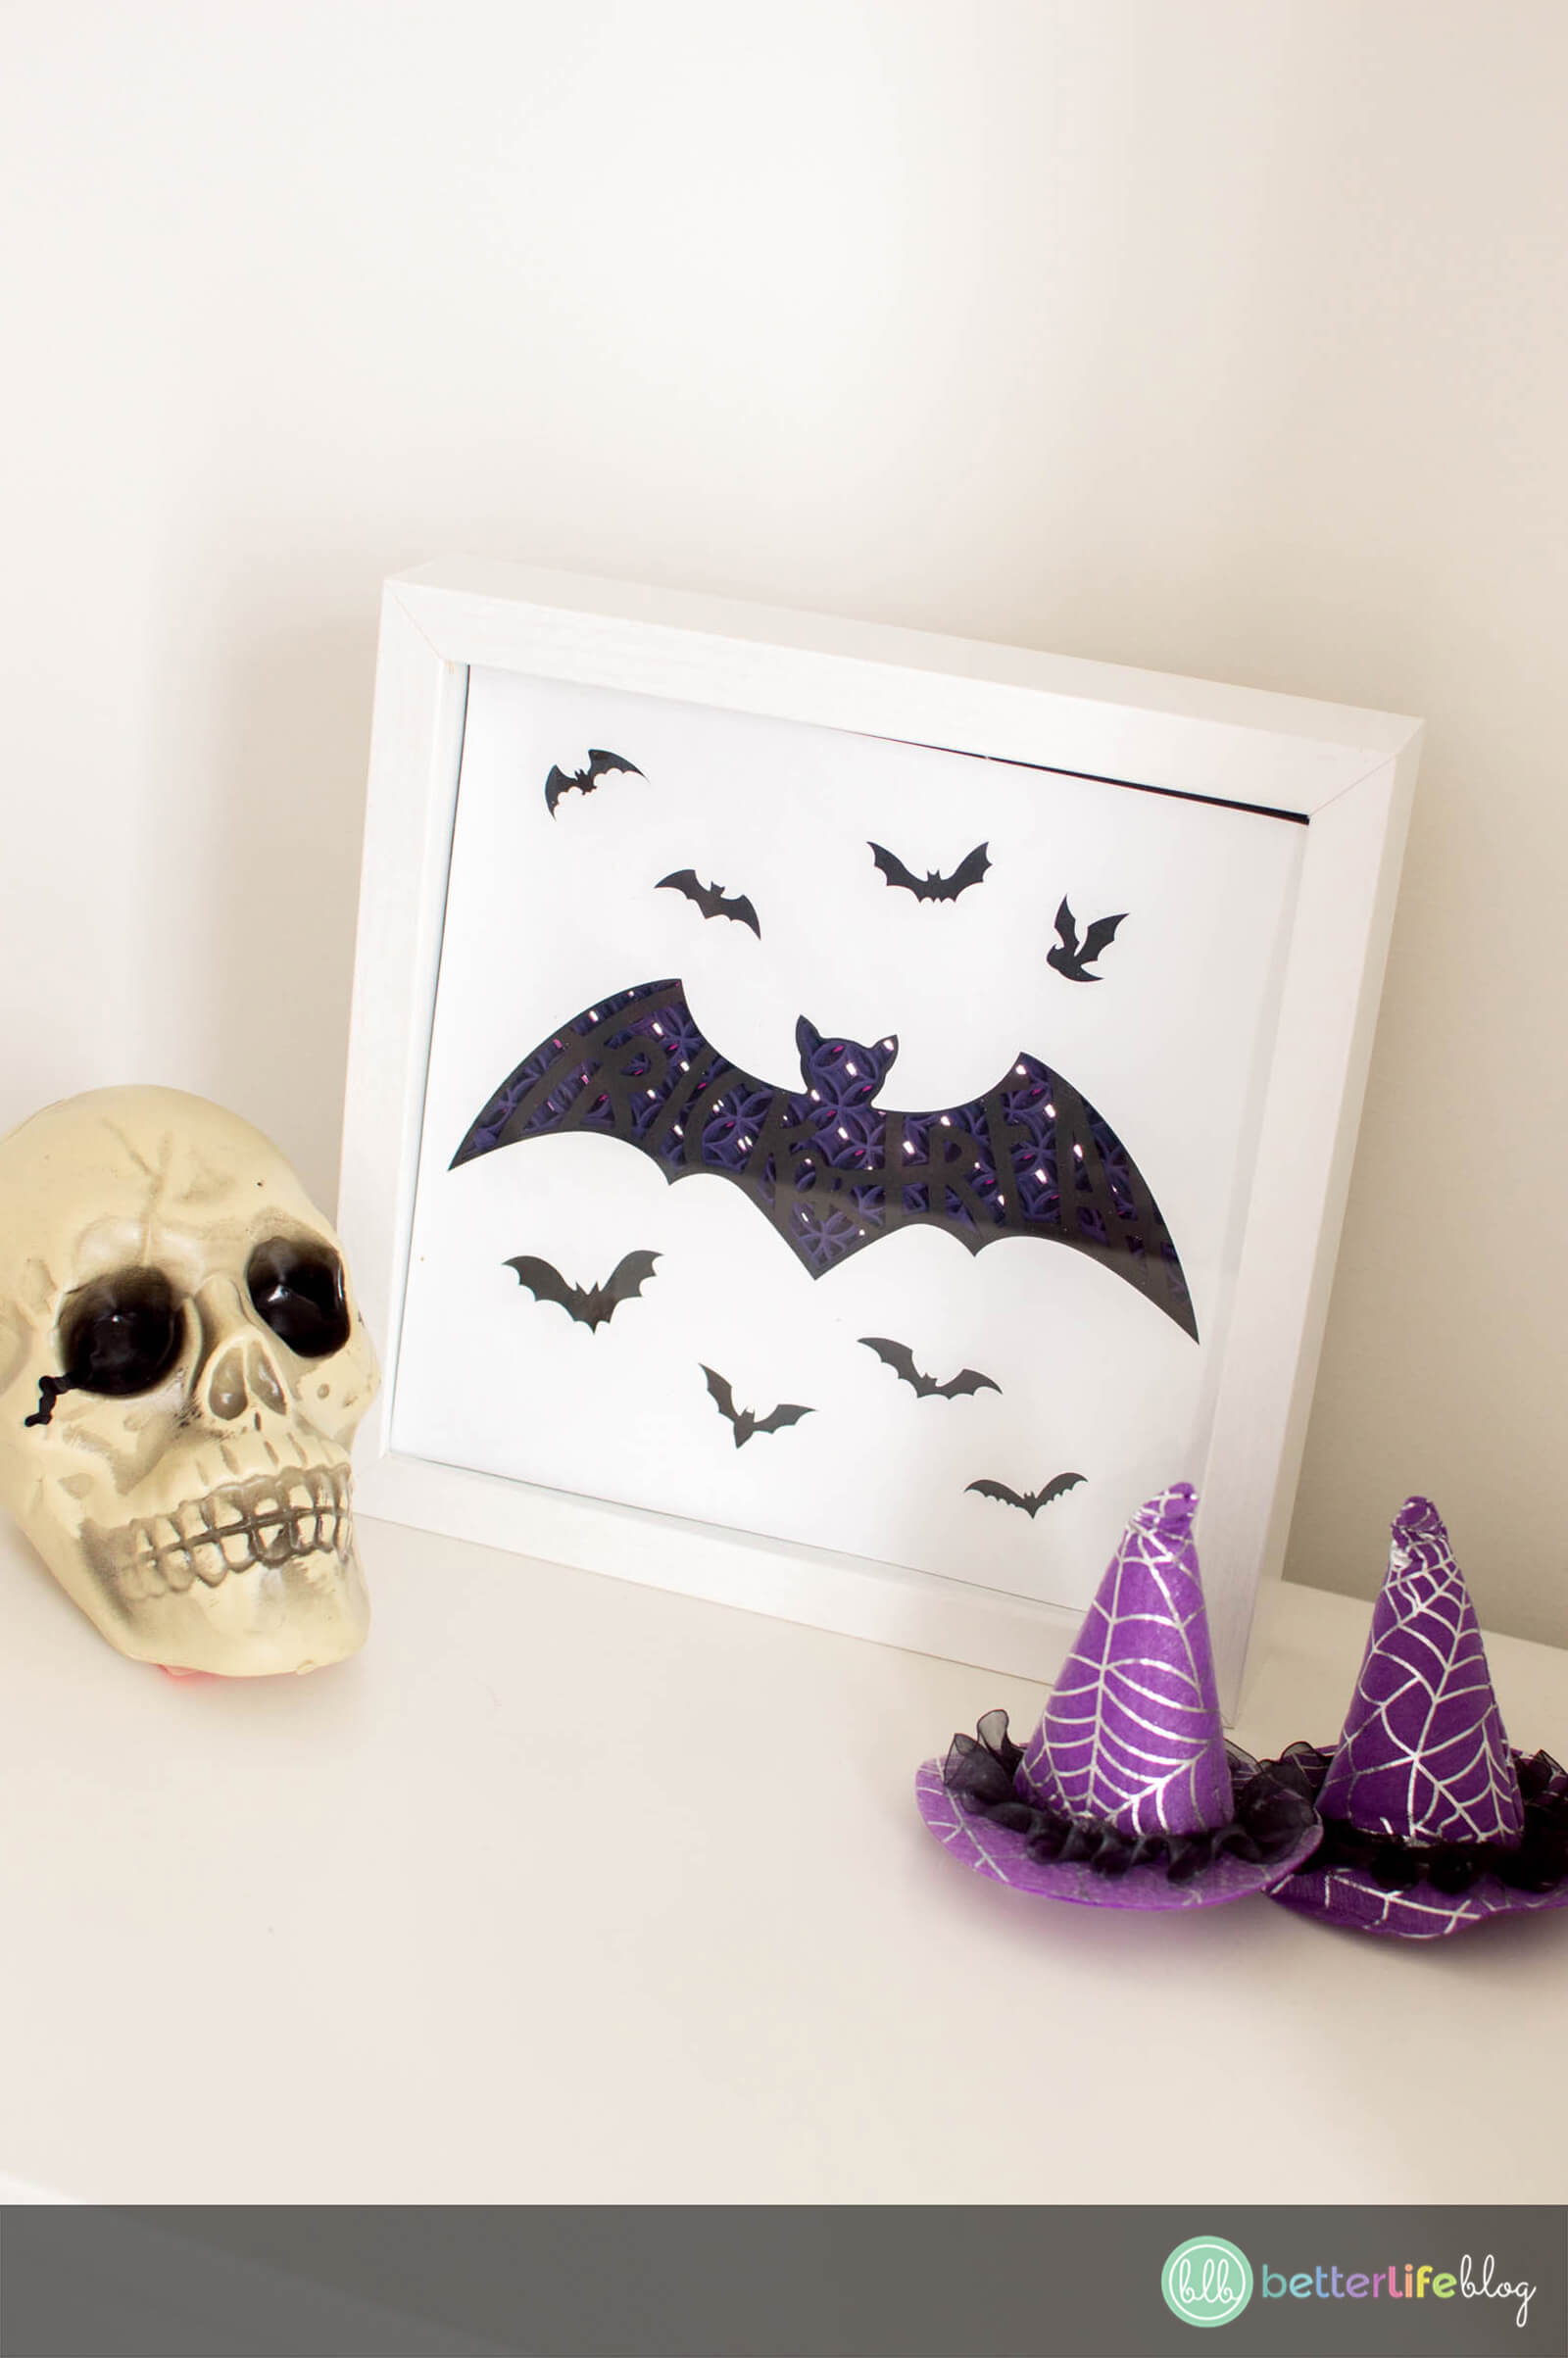 Looking to add some more Halloween décor to your home? Check out this full tutorial for the easiest ever Halloween shadow box!